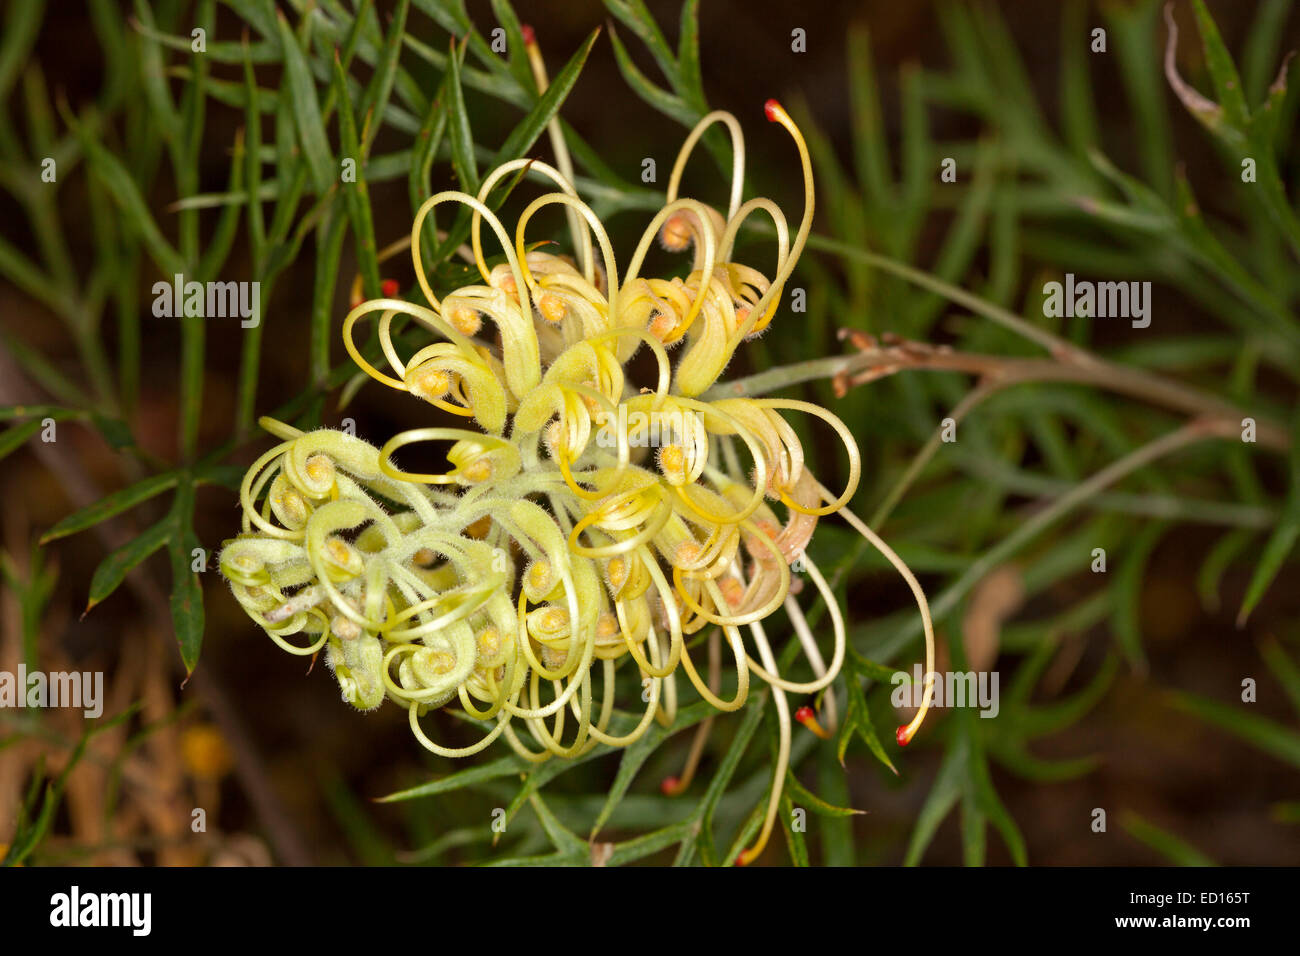 Spectacular pale yellow flower of Grevillea Peaches & Cream, Australian native plant, against background of emerald green leaves Stock Photo